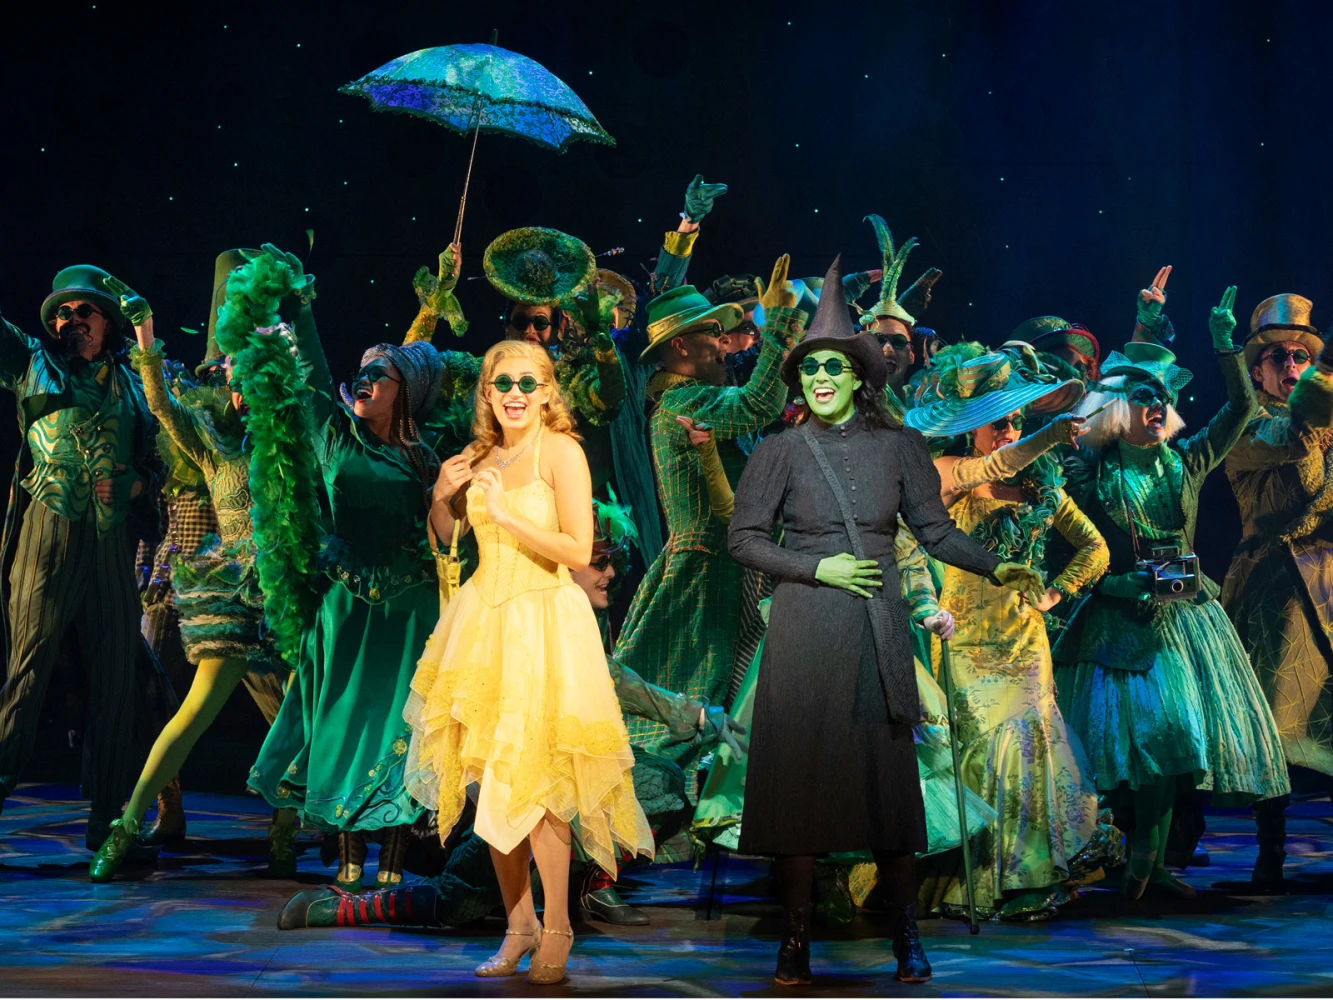 WICKED at the Regent Theatre: What to expect - 2